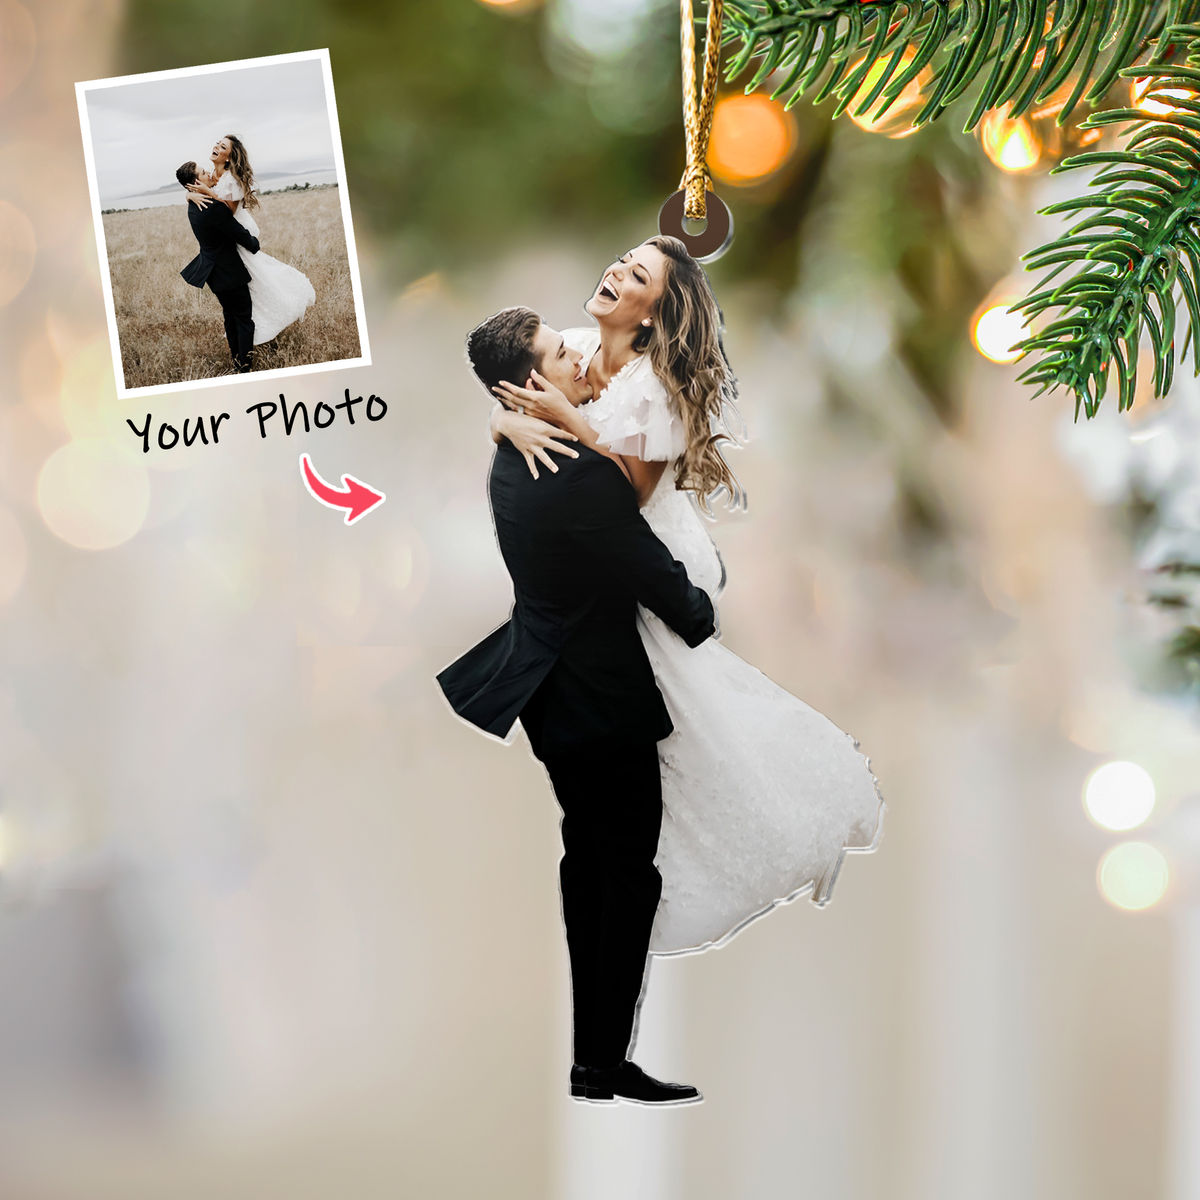 Photo Ornament - Wedding Gift - Anniversary Gifts - Gift for Couple - Couple Photo Gifts - Customized Your Photo Ornaments_3